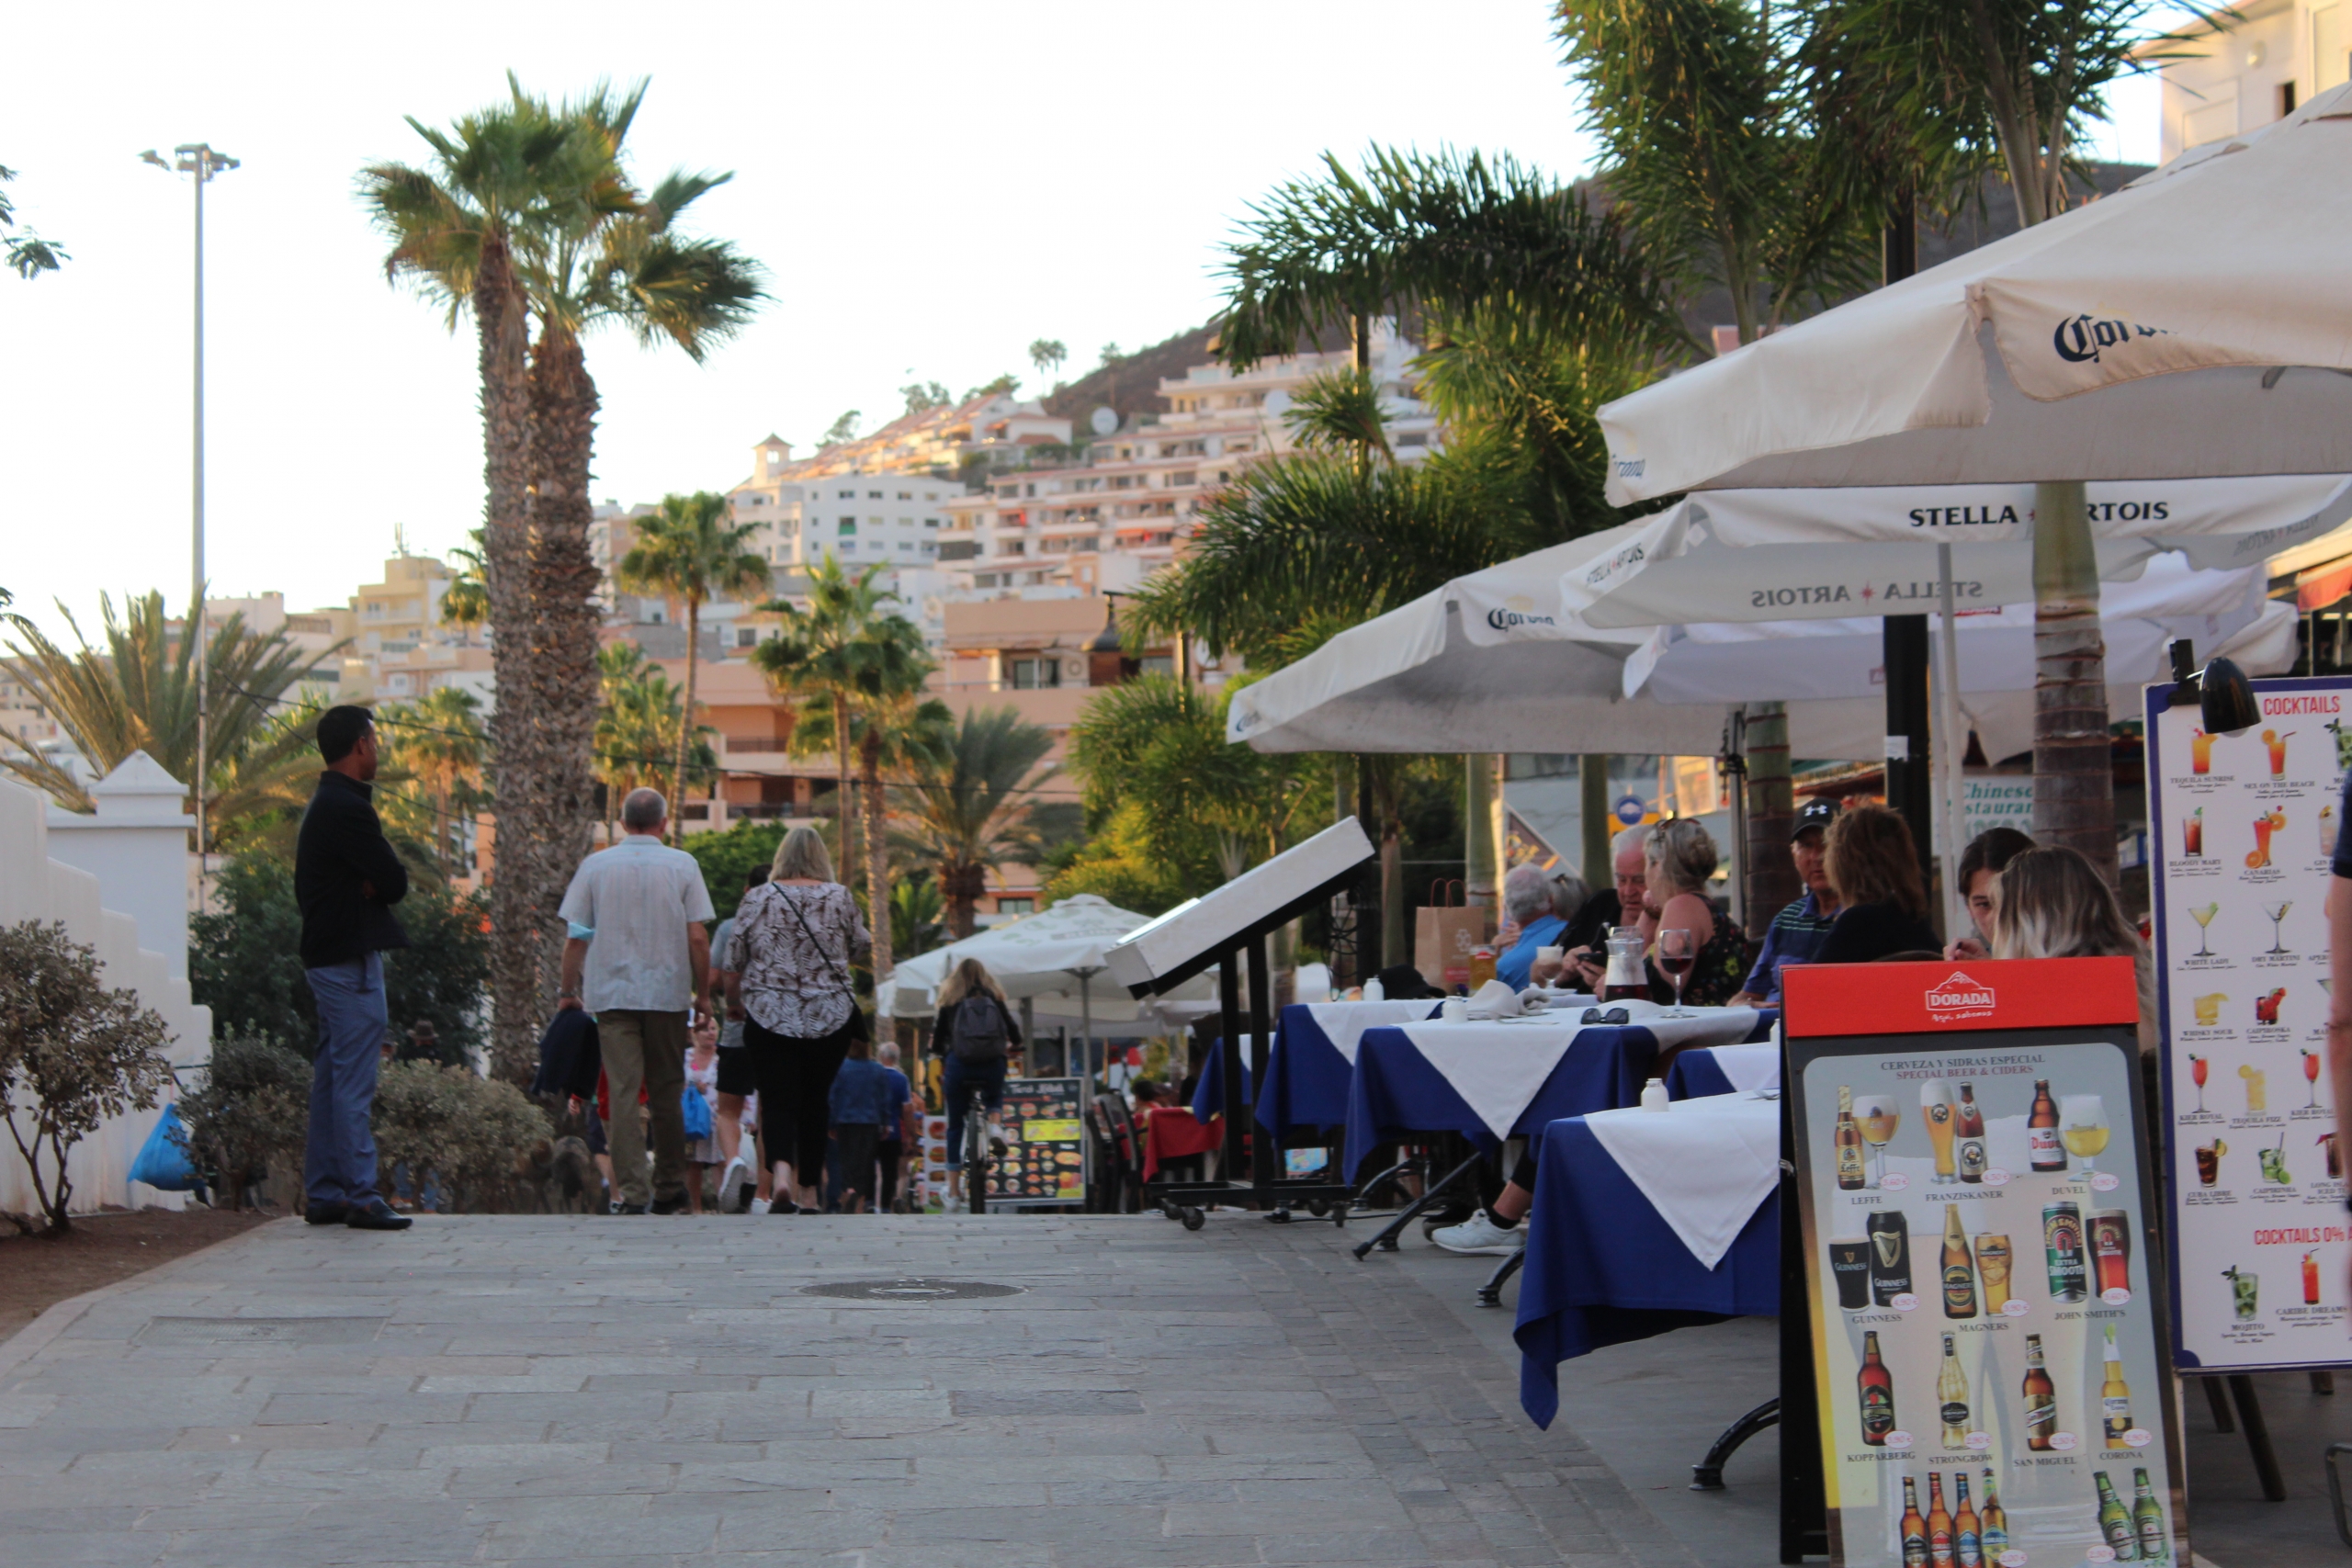 Tourists in the Canary Islands